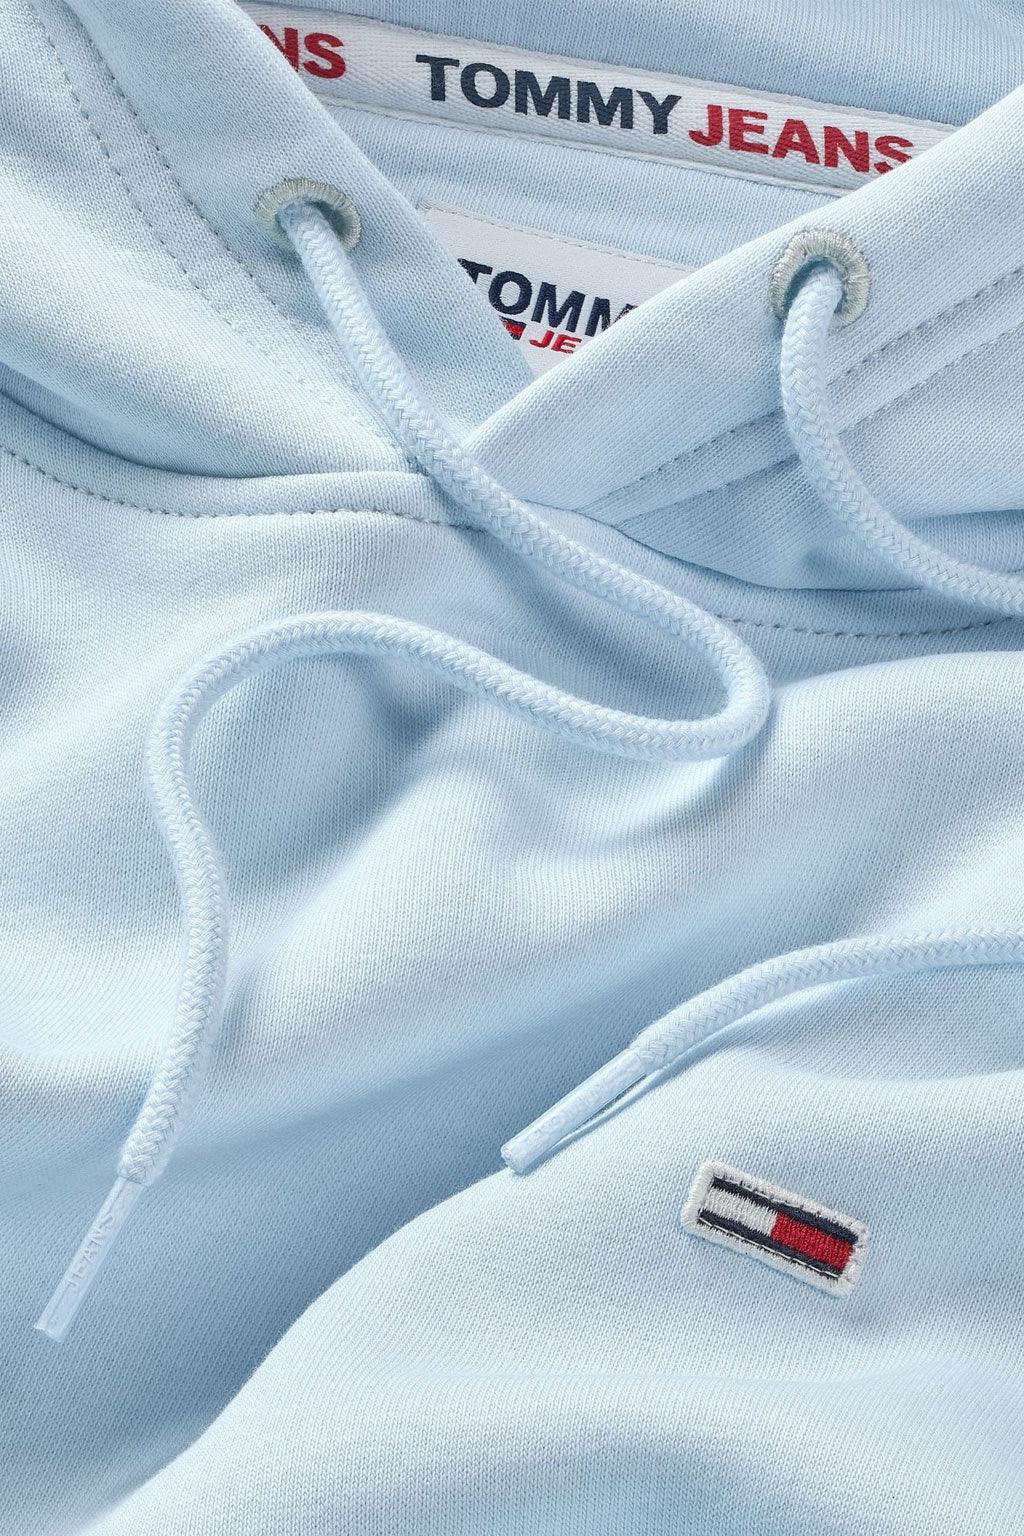 Tommy Jeans hoodie - Big Boss | the menswear concept